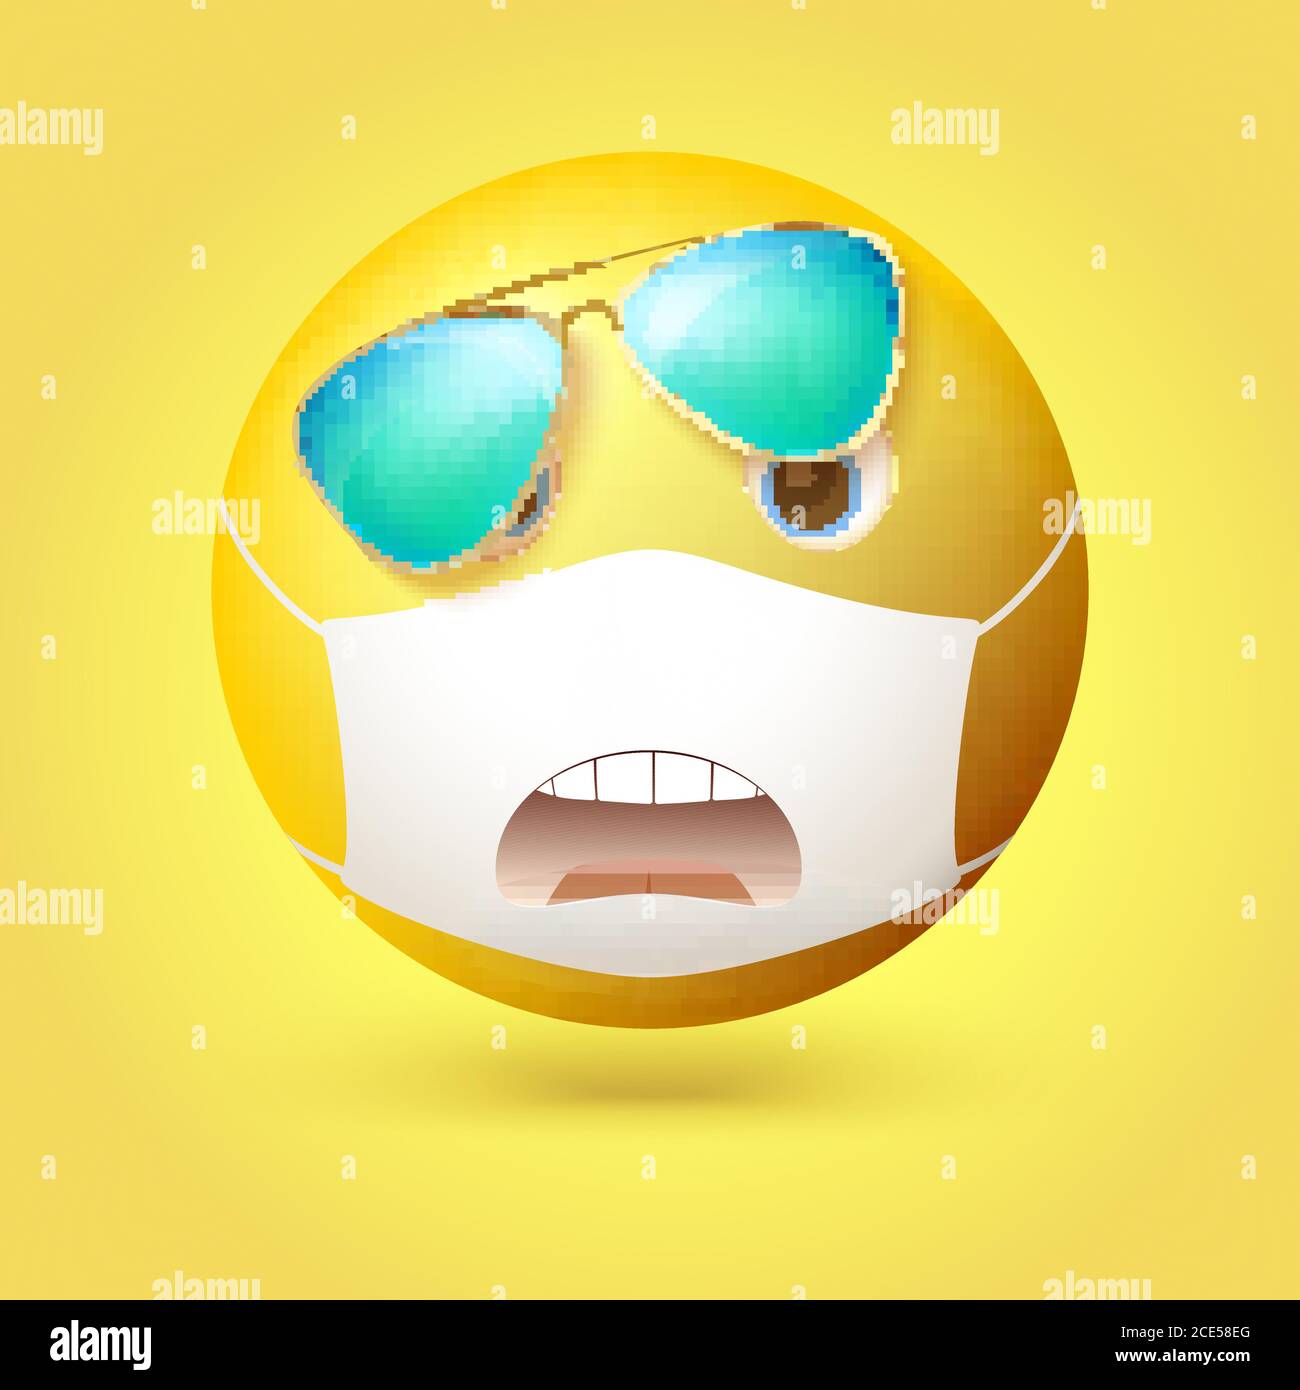 The emotion of surprise. Emoji emoticon with medical mask and sunglasses on face. Opened mouth painted on mask.  Stock Vector